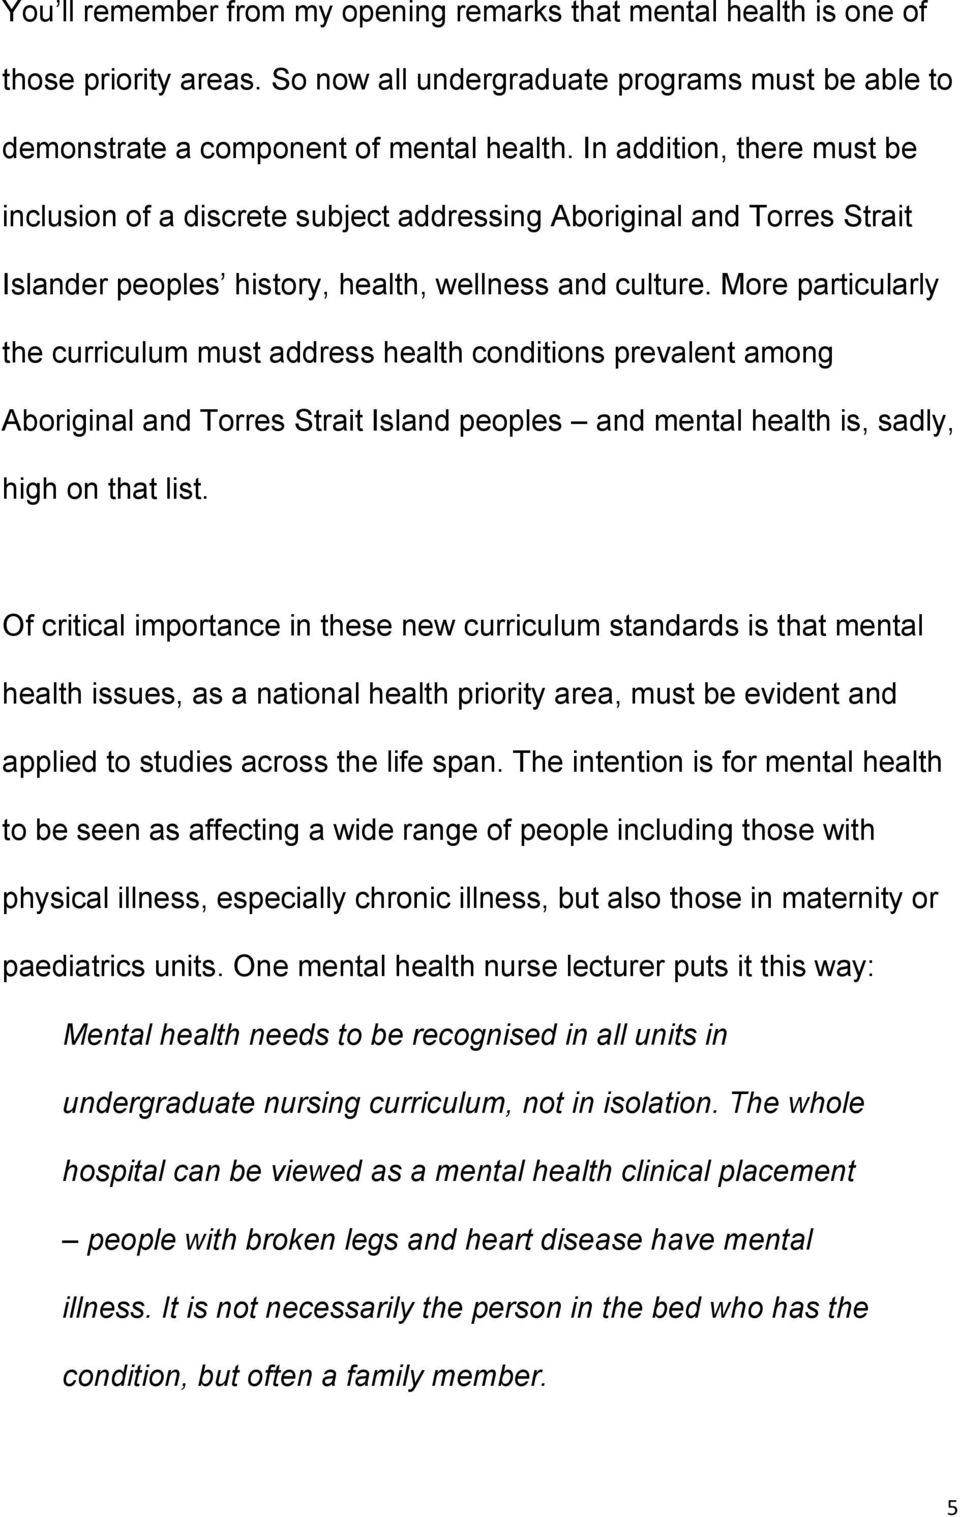 More particularly the curriculum must address health conditions prevalent among Aboriginal and Torres Strait Island peoples and mental health is, sadly, high on that list.